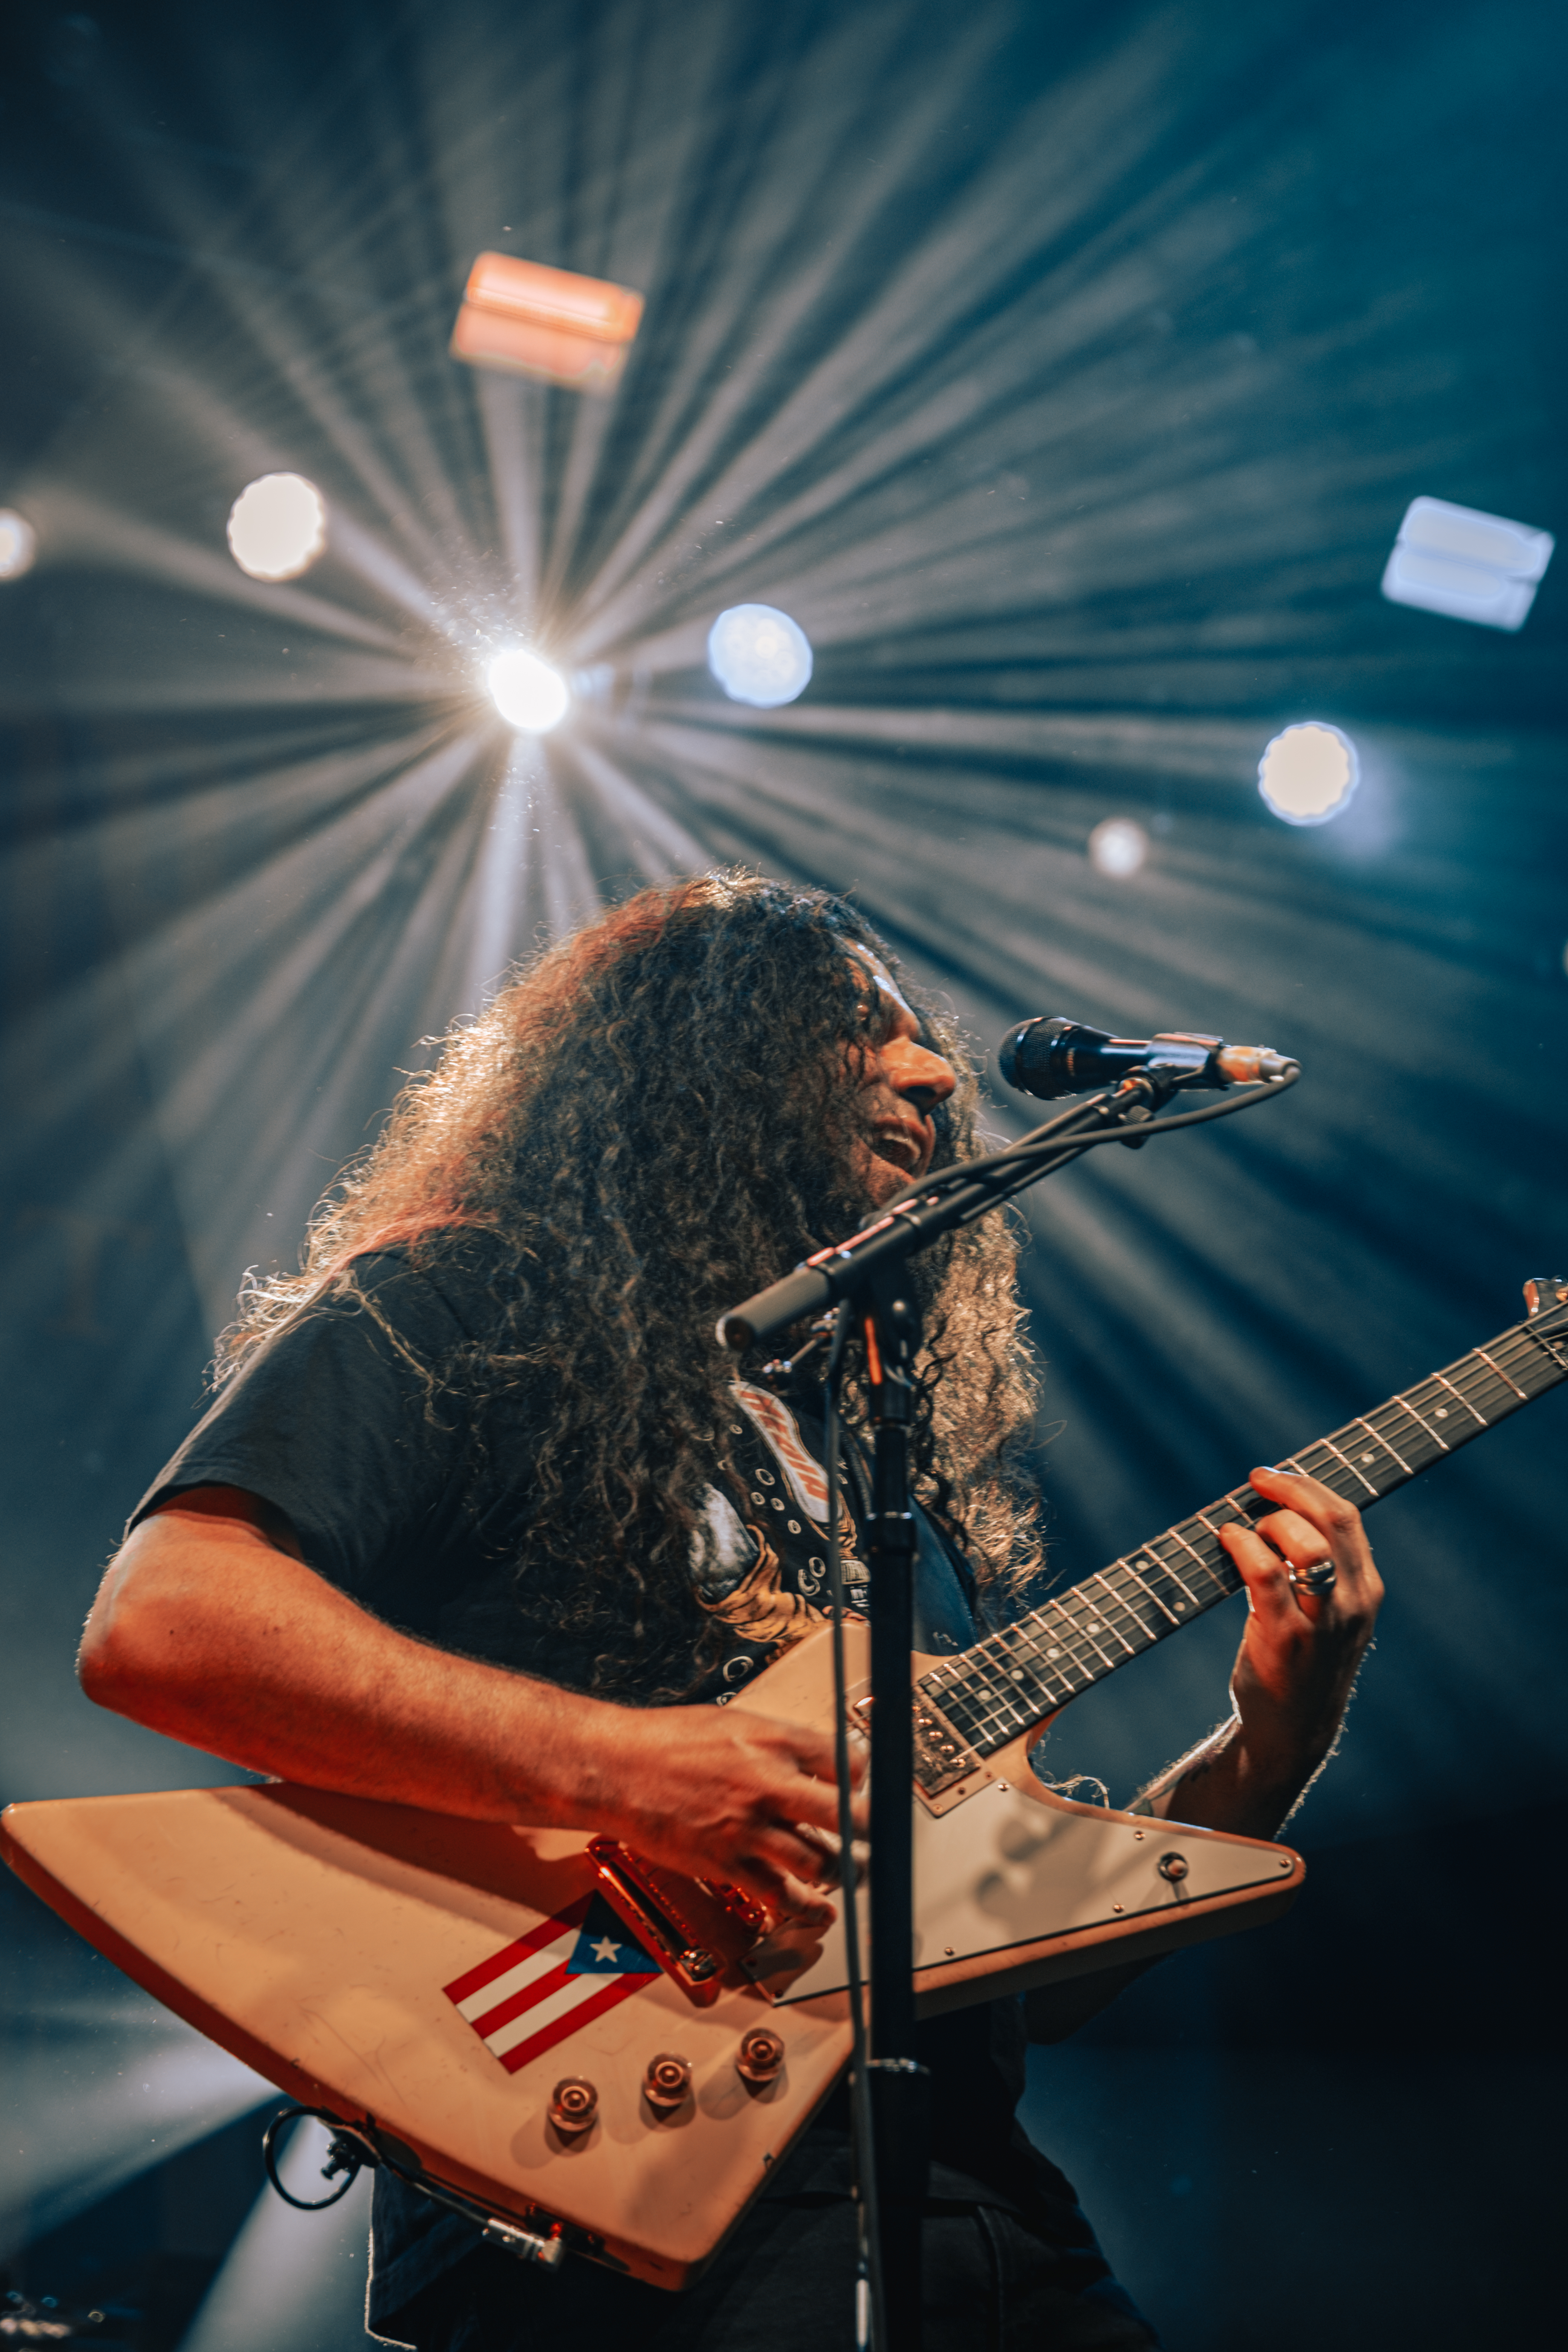 Coheed and Cambria photo by Zak DeFreze for HM Magazine